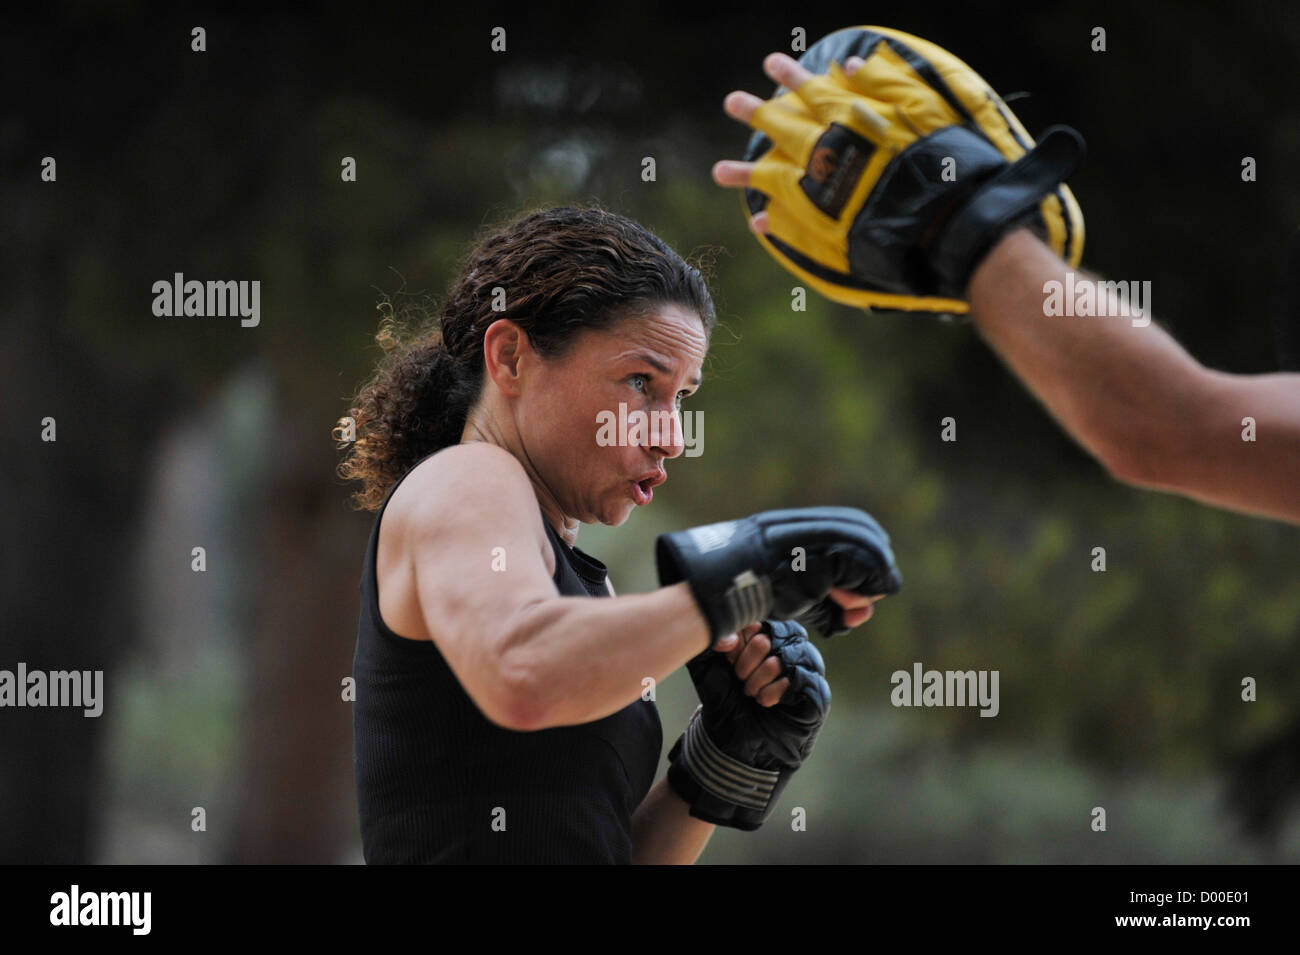 woman in her forties strikes boxer pose and watches padded hand during martial arts training in a park Stock Photo